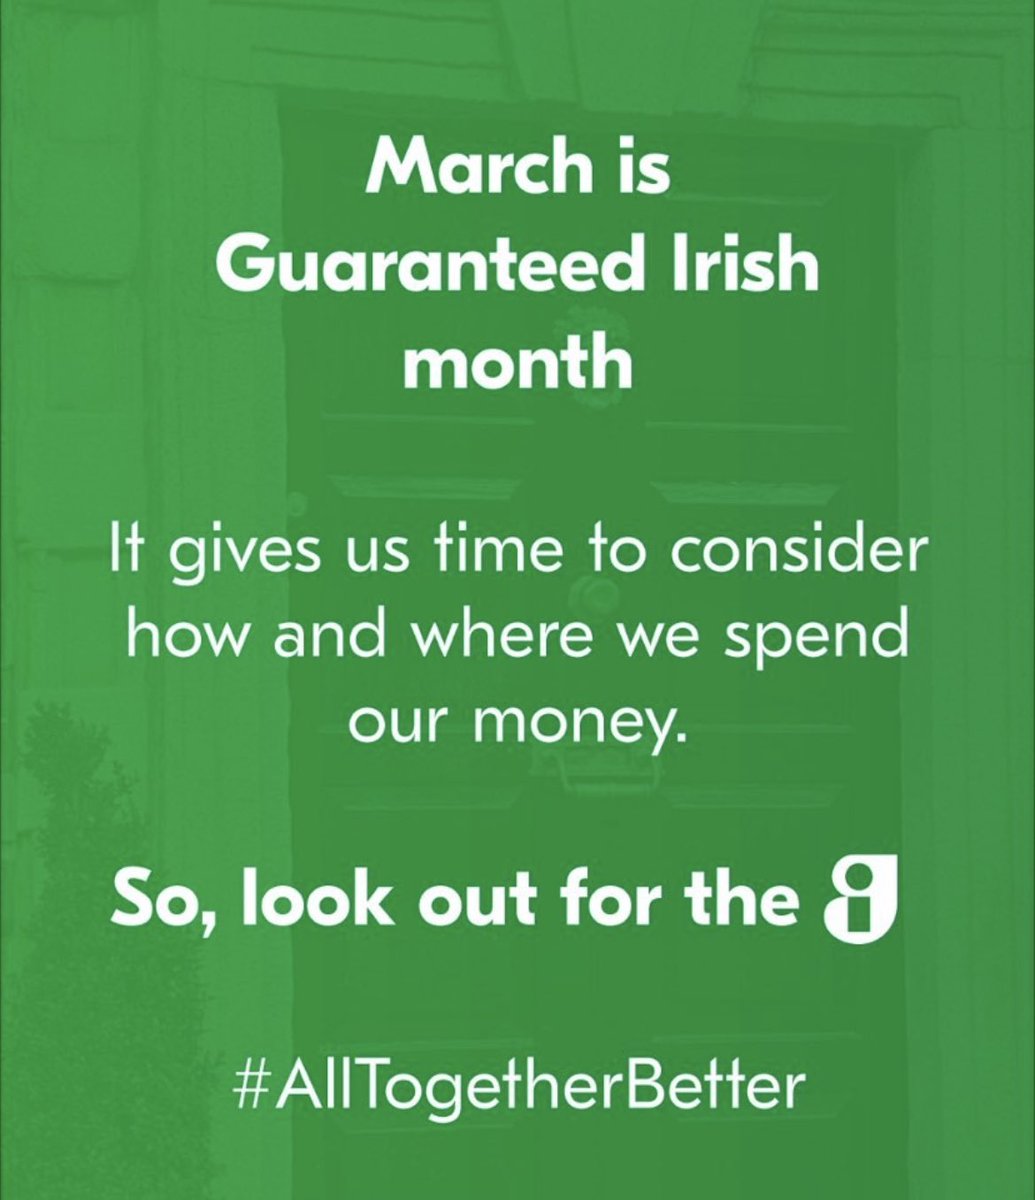 March is @guaranteed_irl month so have a think where your spending when you spend #supportirish 💪💪💪🇮🇪🇮🇪🇮🇪